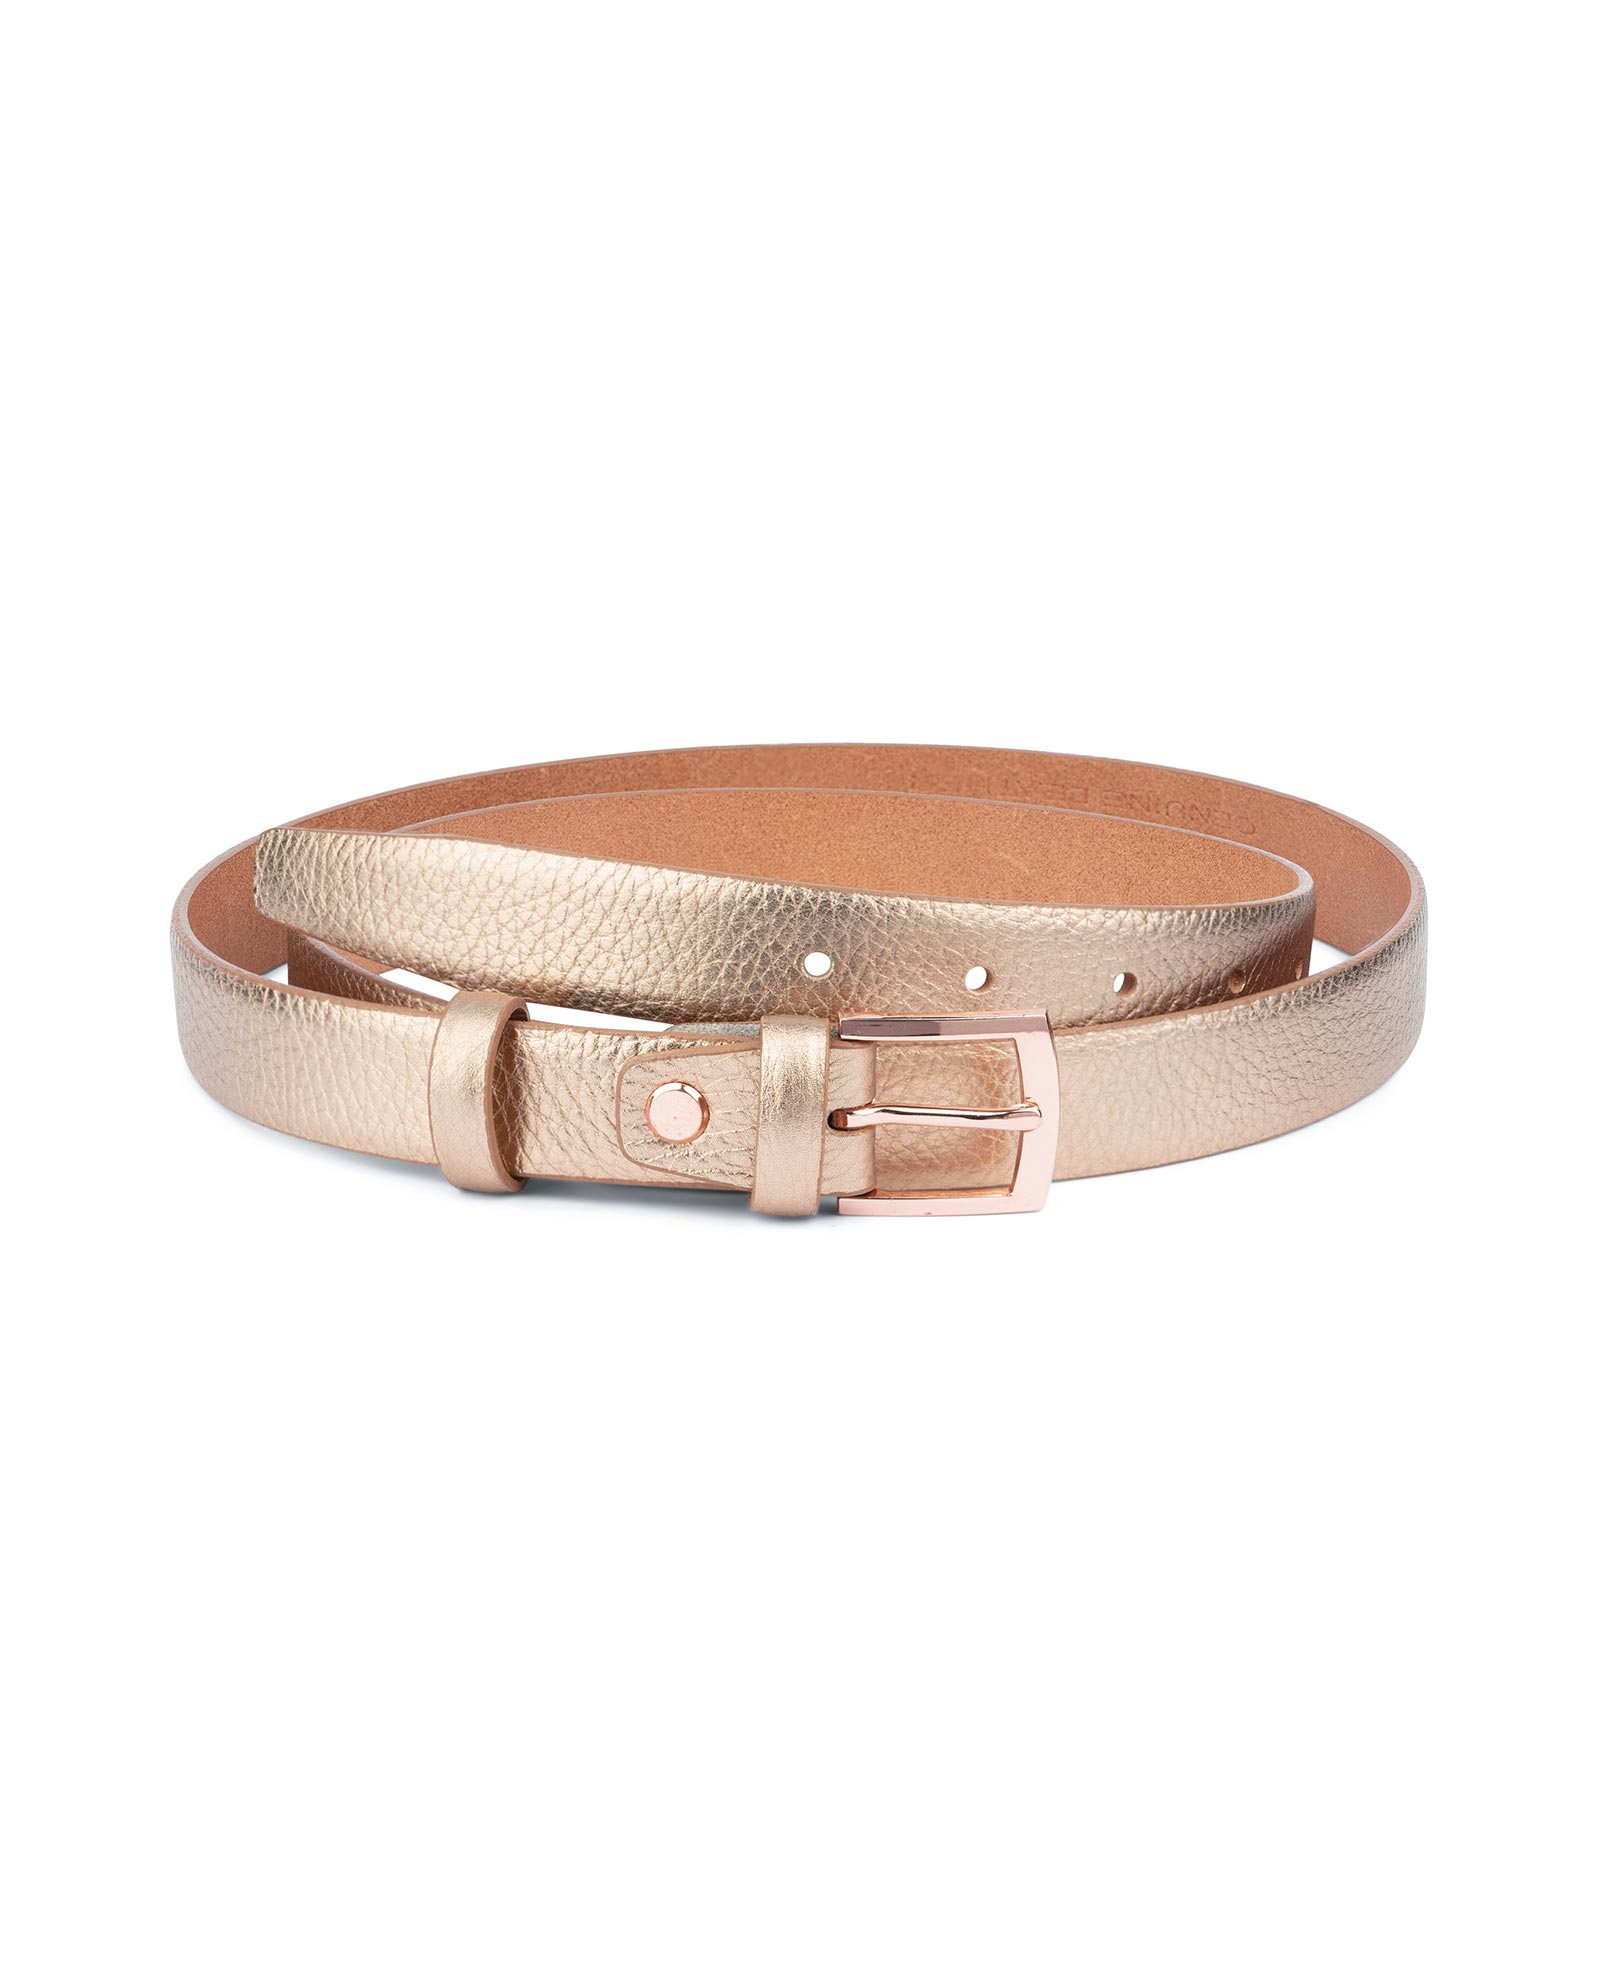 1 Piece Of New European And American Style Women's Wide Belt